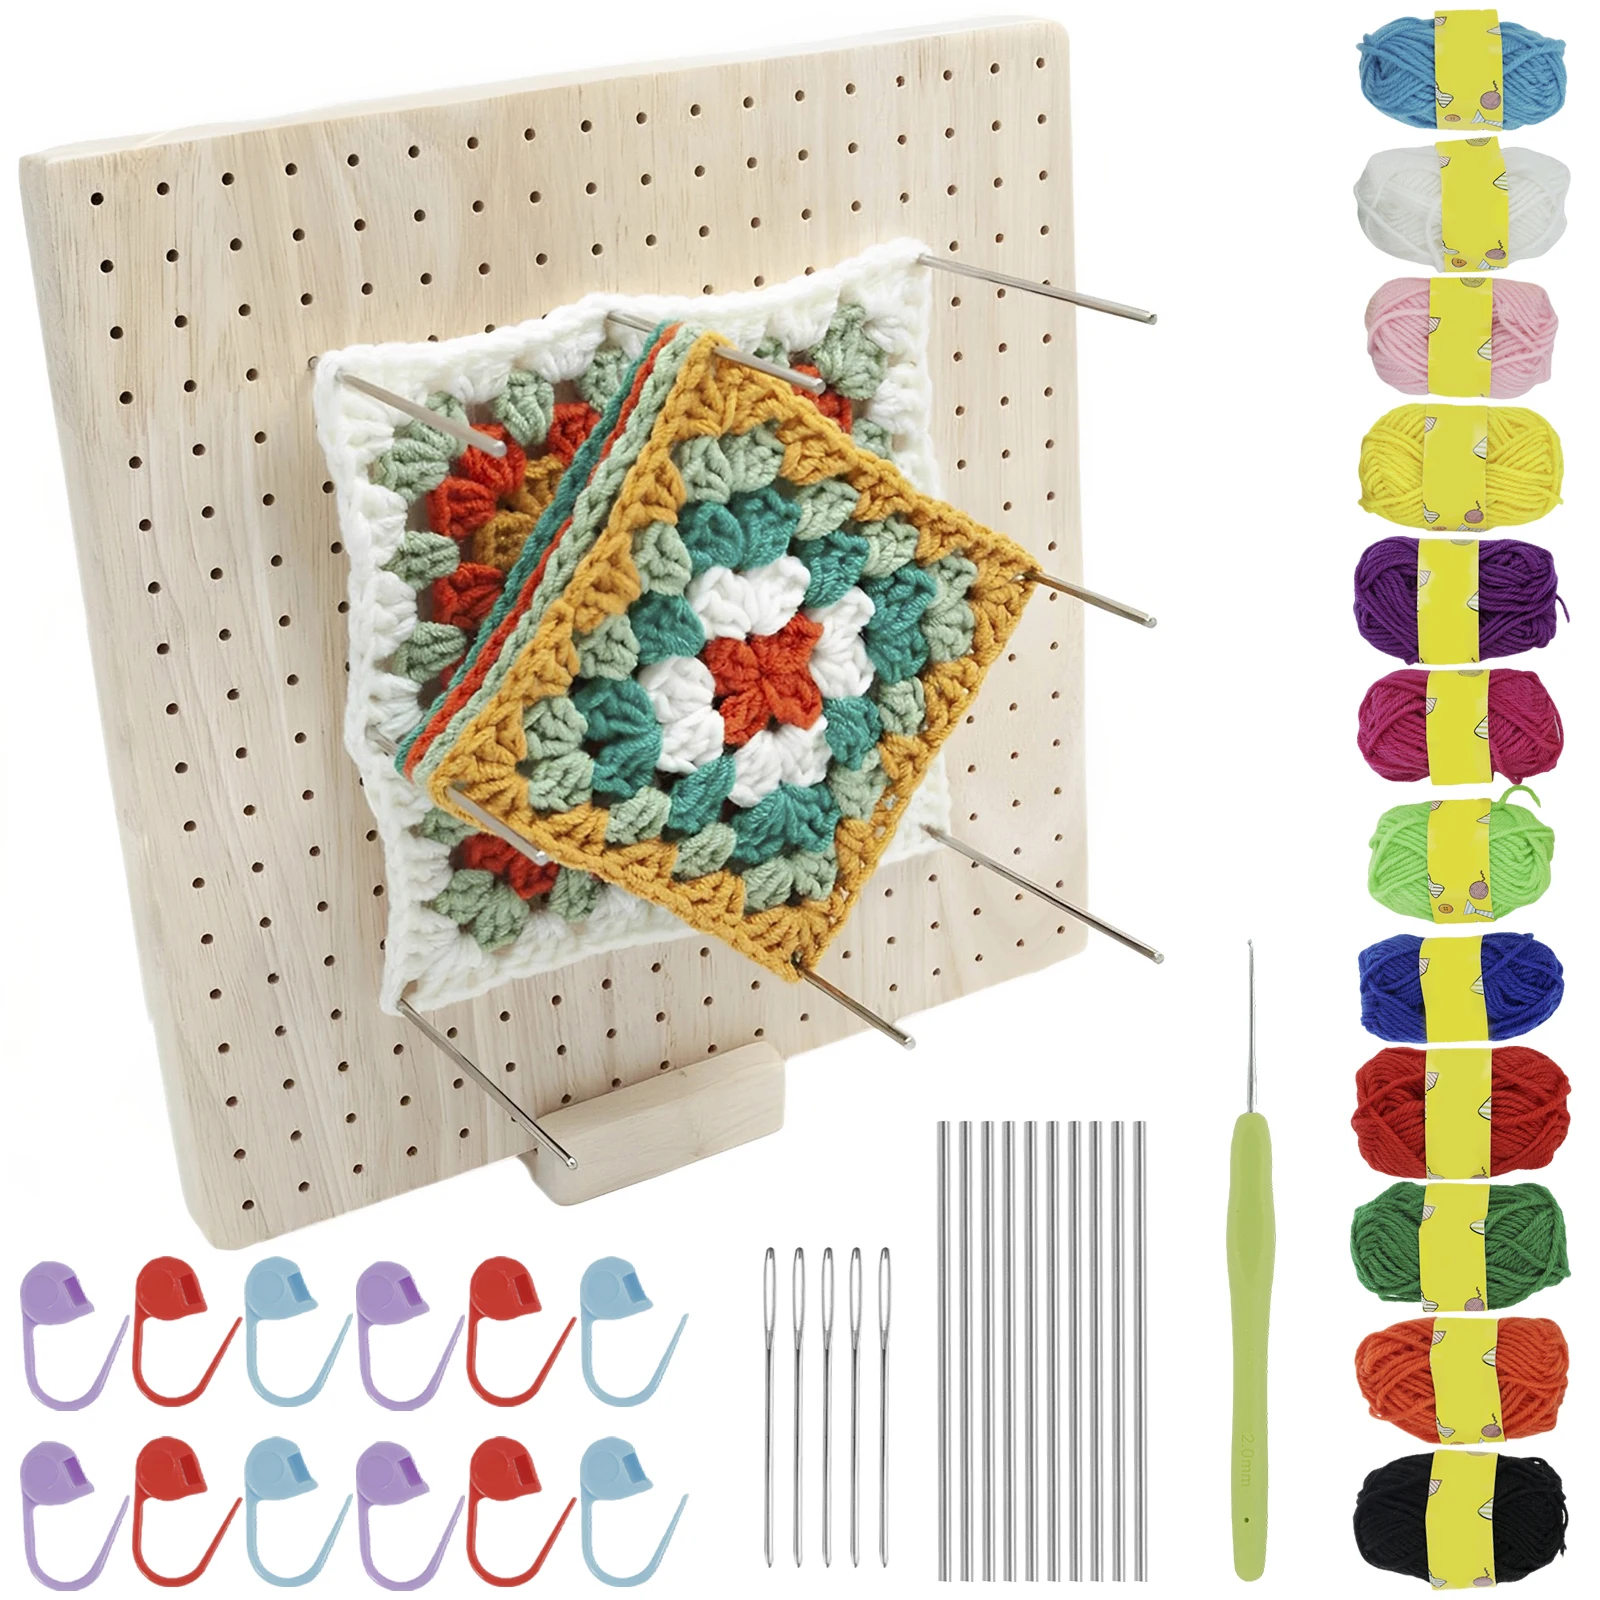 

New 9.25inch Crochet Blocking Board with 20 Pins Bamboo Wooden Blocking Board with 12 Colored Yarn and Stitch Marker Reusable